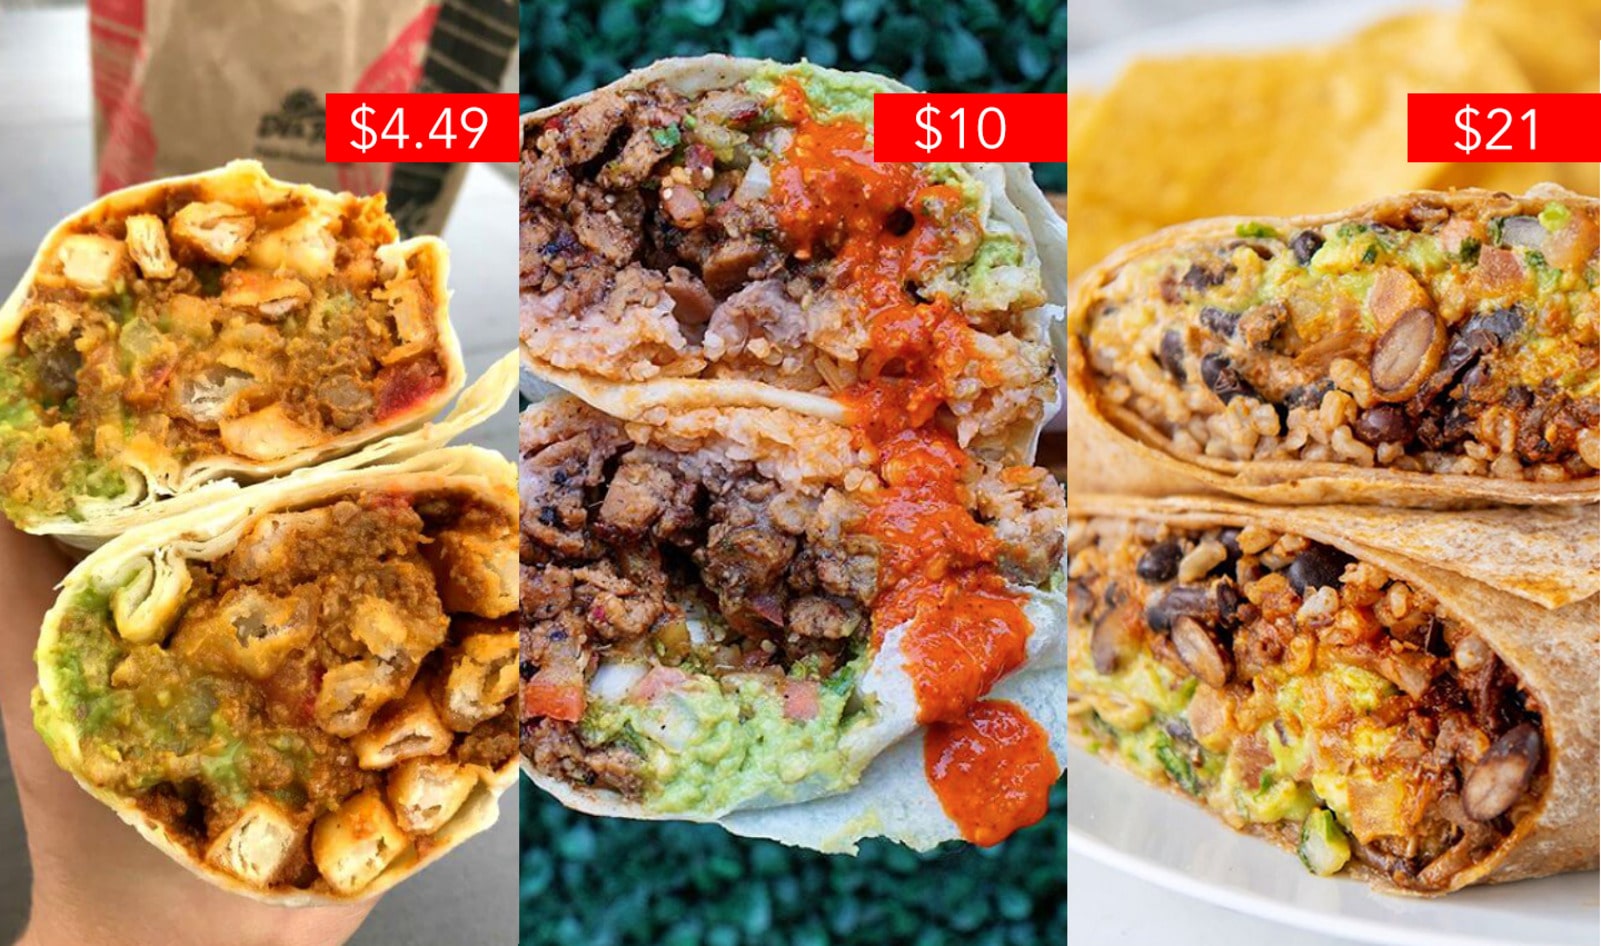 I Compared 3 Different Vegan Burritos at 3 Different Price Points, and What I Found Was Surprising